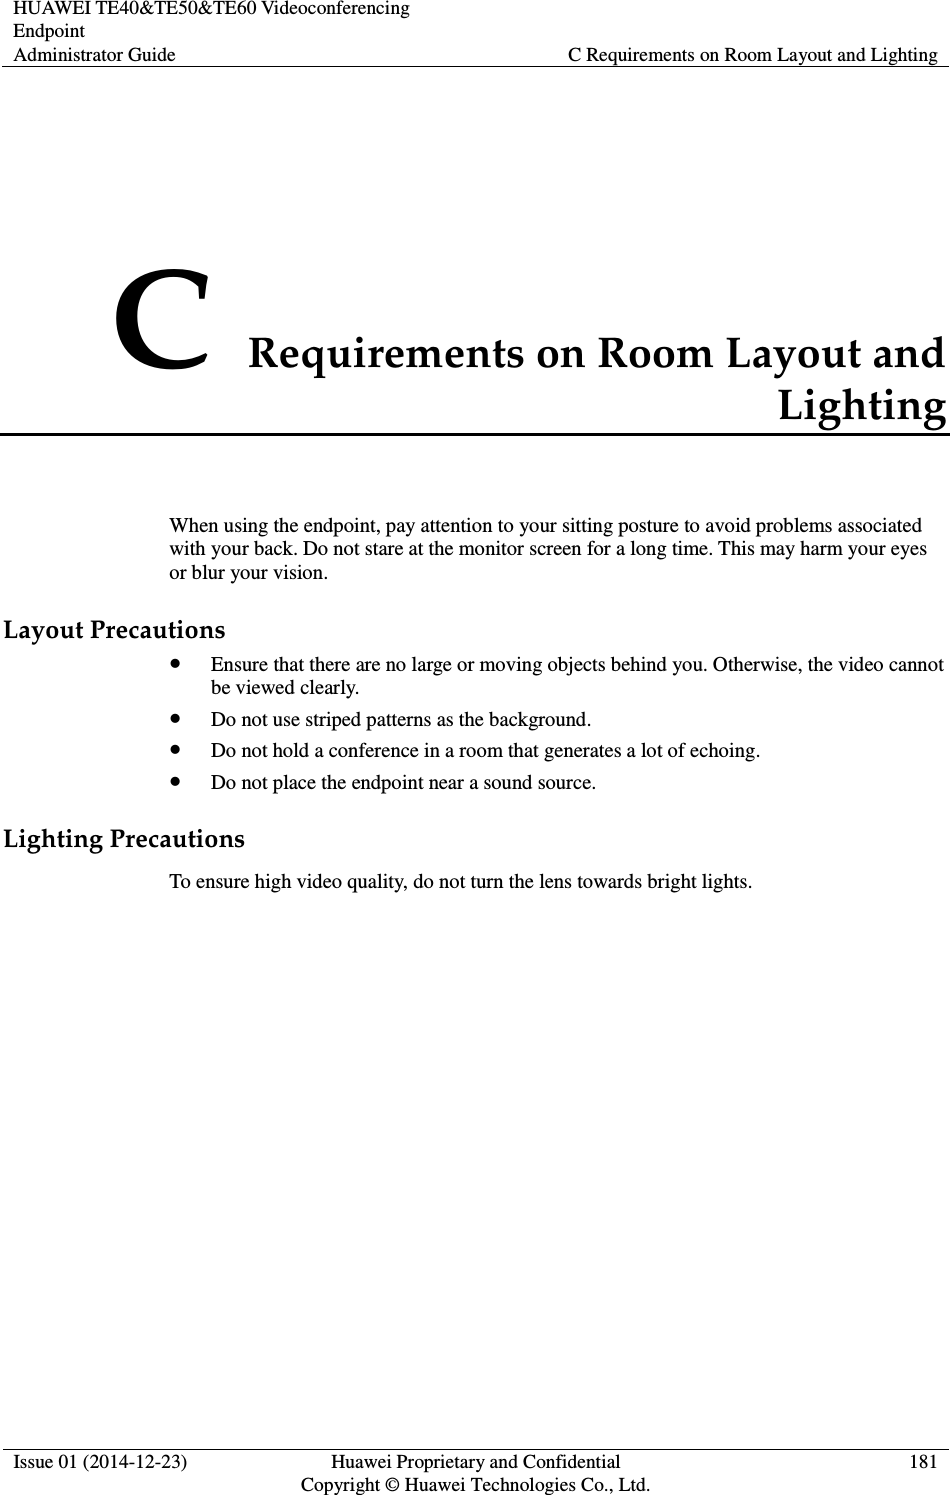 HUAWEI TE40&amp;TE50&amp;TE60 Videoconferencing Endpoint Administrator Guide  C Requirements on Room Layout and Lighting  Issue 01 (2014-12-23)  Huawei Proprietary and Confidential                                     Copyright © Huawei Technologies Co., Ltd. 181  C Requirements on Room Layout and Lighting When using the endpoint, pay attention to your sitting posture to avoid problems associated with your back. Do not stare at the monitor screen for a long time. This may harm your eyes or blur your vision. Layout Precautions  Ensure that there are no large or moving objects behind you. Otherwise, the video cannot be viewed clearly.  Do not use striped patterns as the background.  Do not hold a conference in a room that generates a lot of echoing.  Do not place the endpoint near a sound source. Lighting Precautions To ensure high video quality, do not turn the lens towards bright lights. 